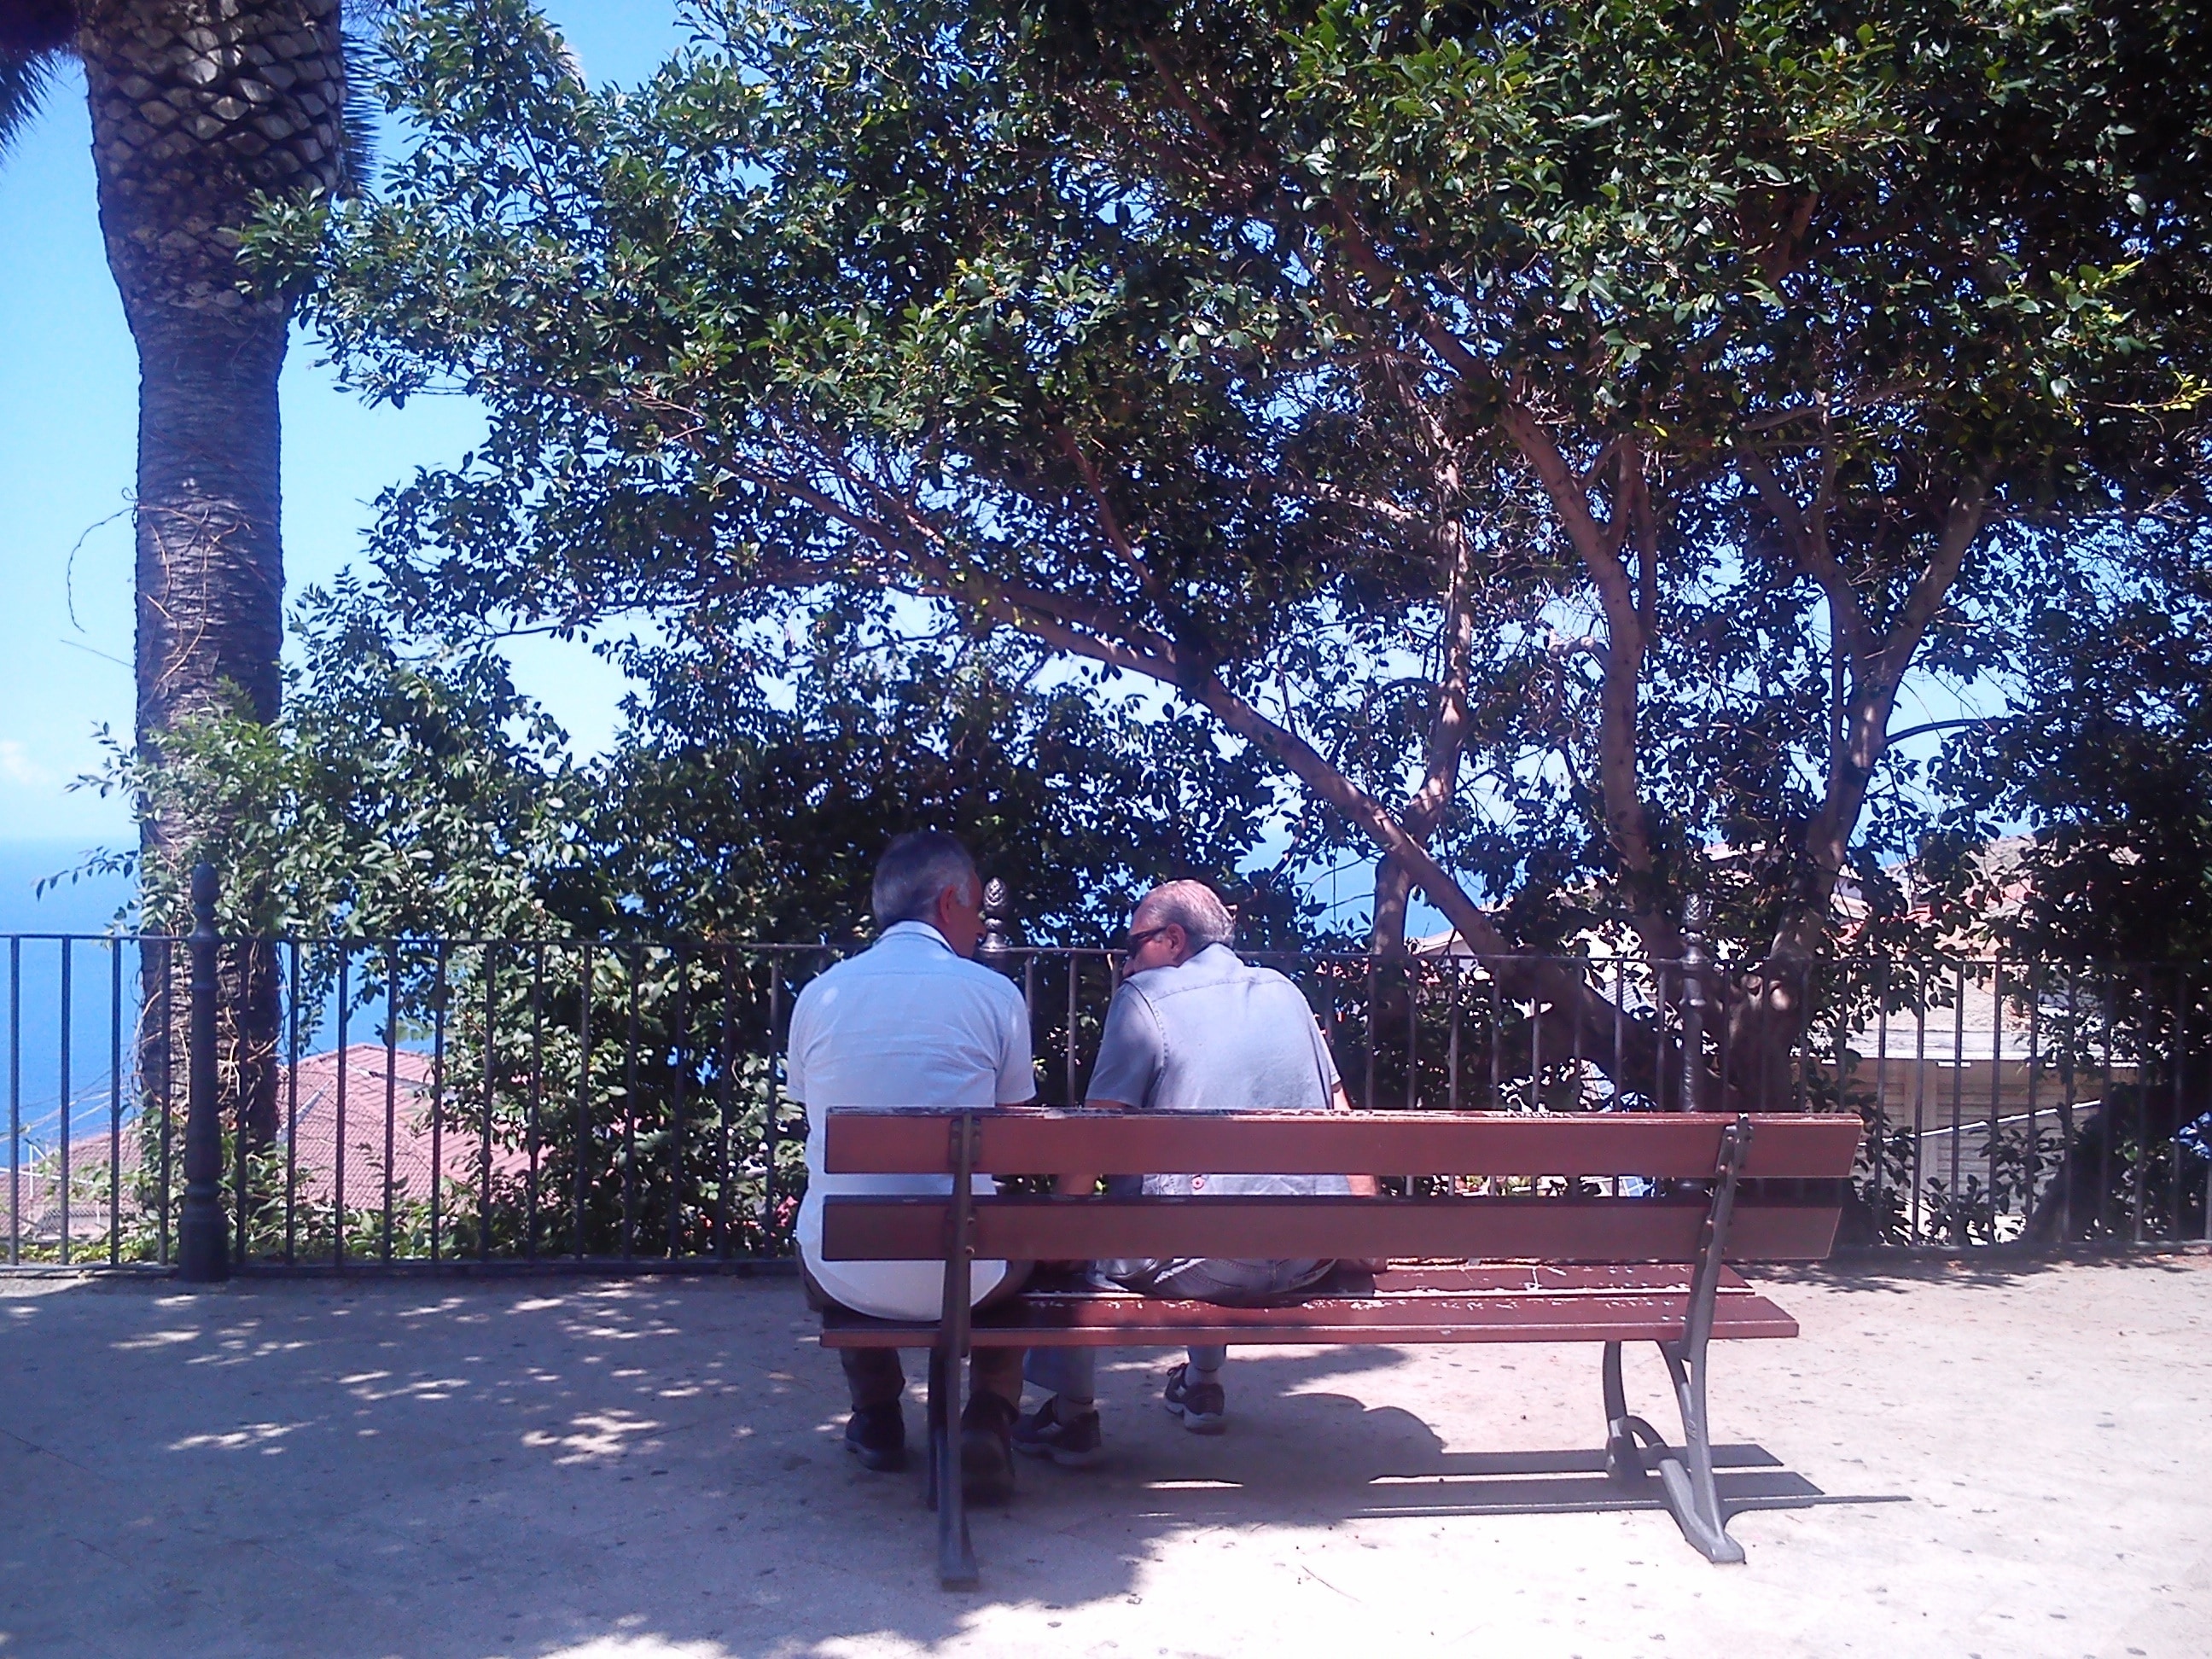 two men sitting on the bench facing the trees